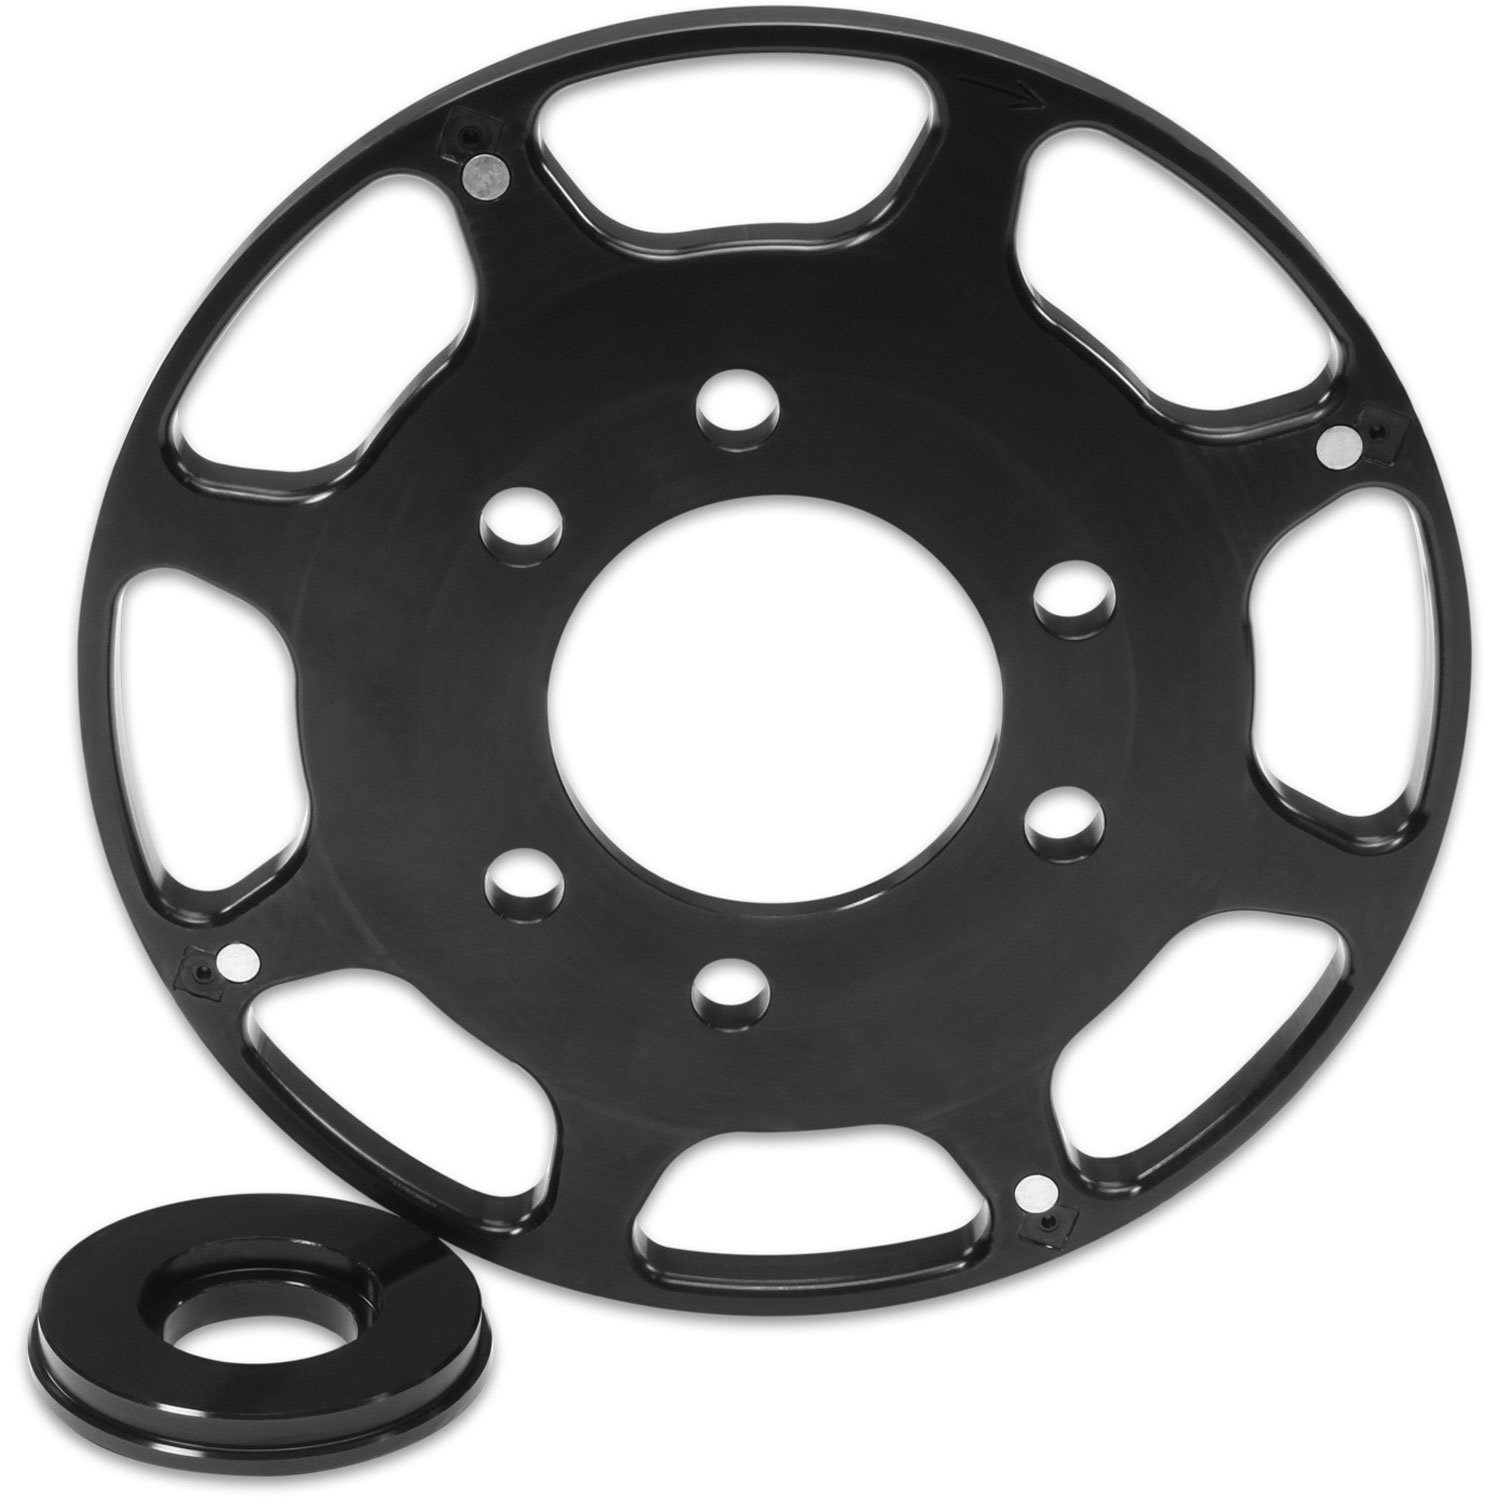 Replacement Crank Trigger Wheel Small Block Chevy 7